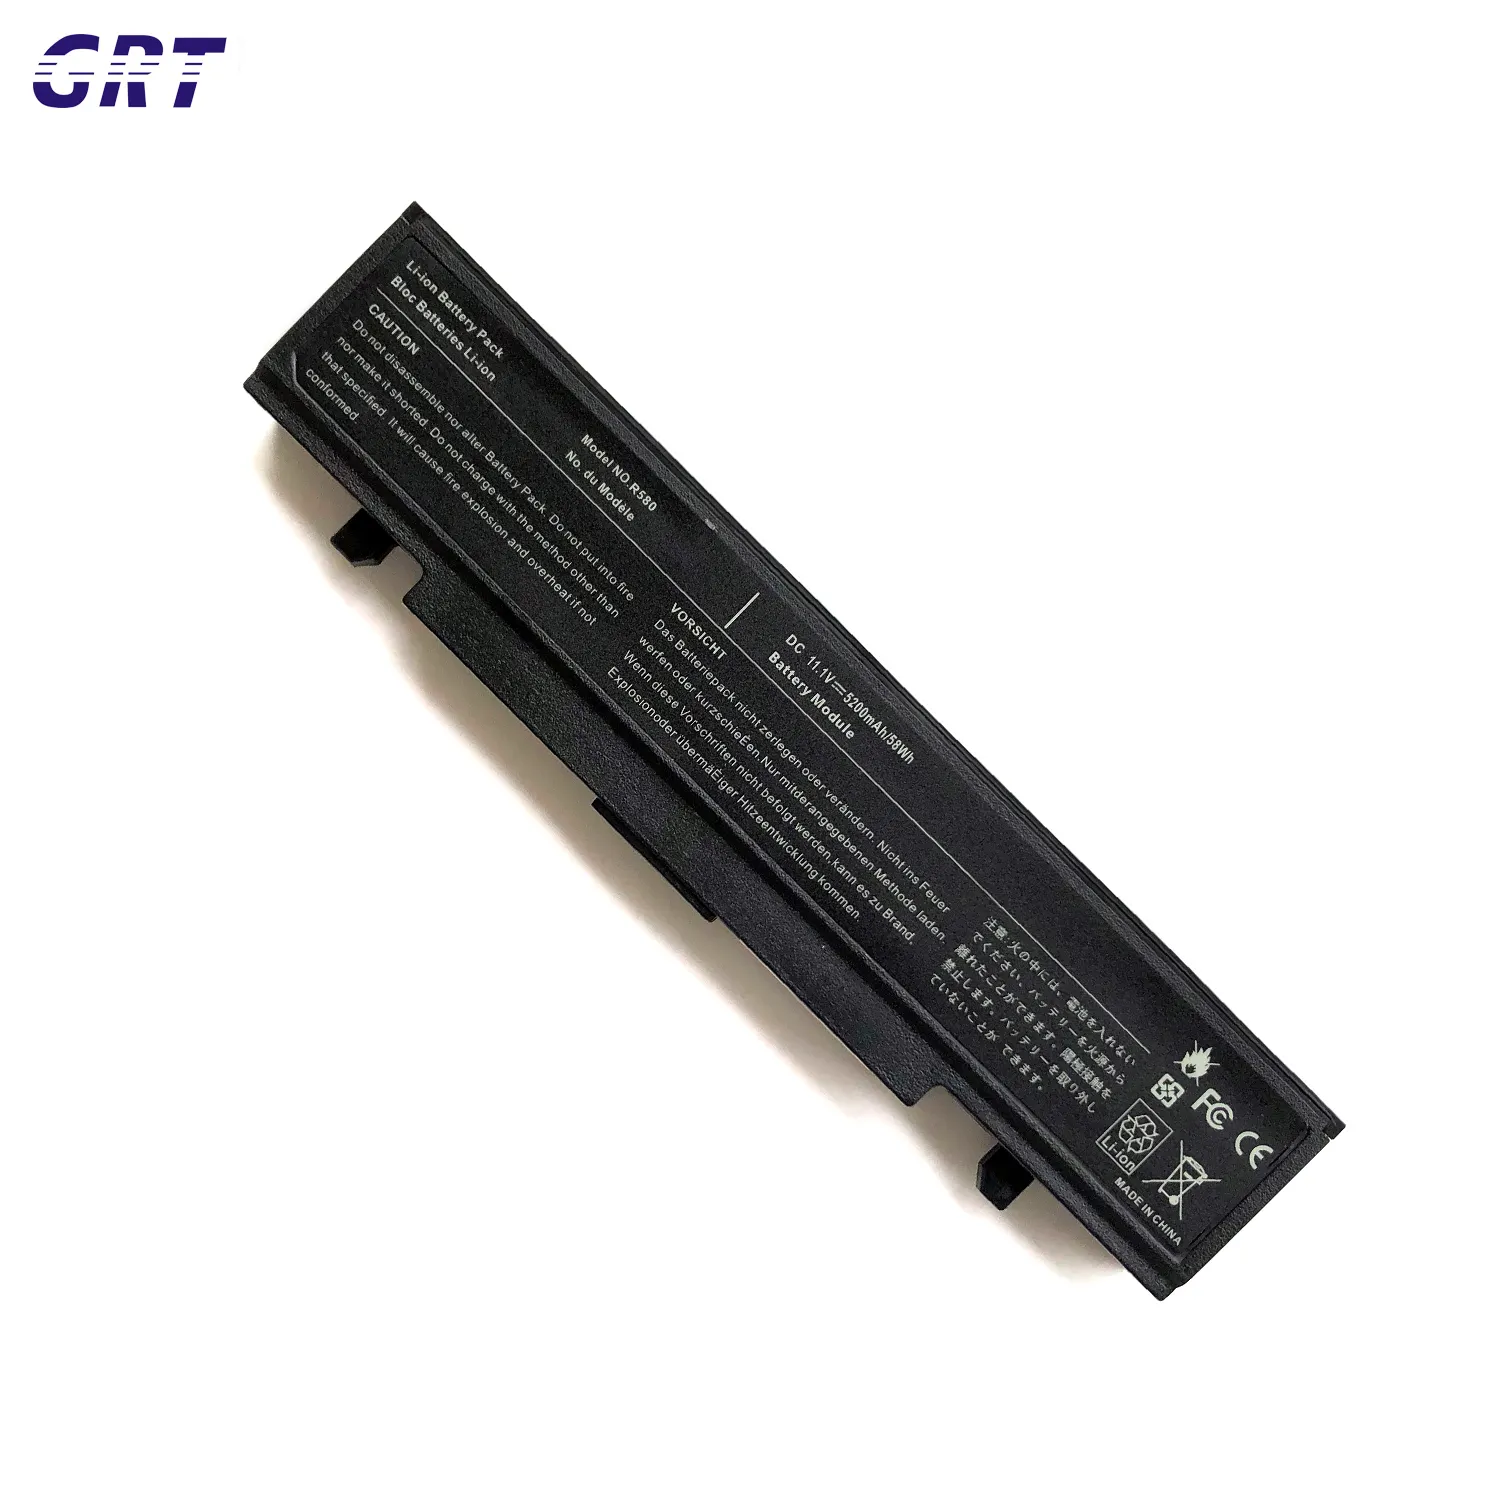 New Laptop Battery For Samsung NP550P7C R428 R460 R580 AA-PB9NS6B PL9NC6B 355V5C AA-PB9NC6B PB9NC5B 11.1V 6600MAh